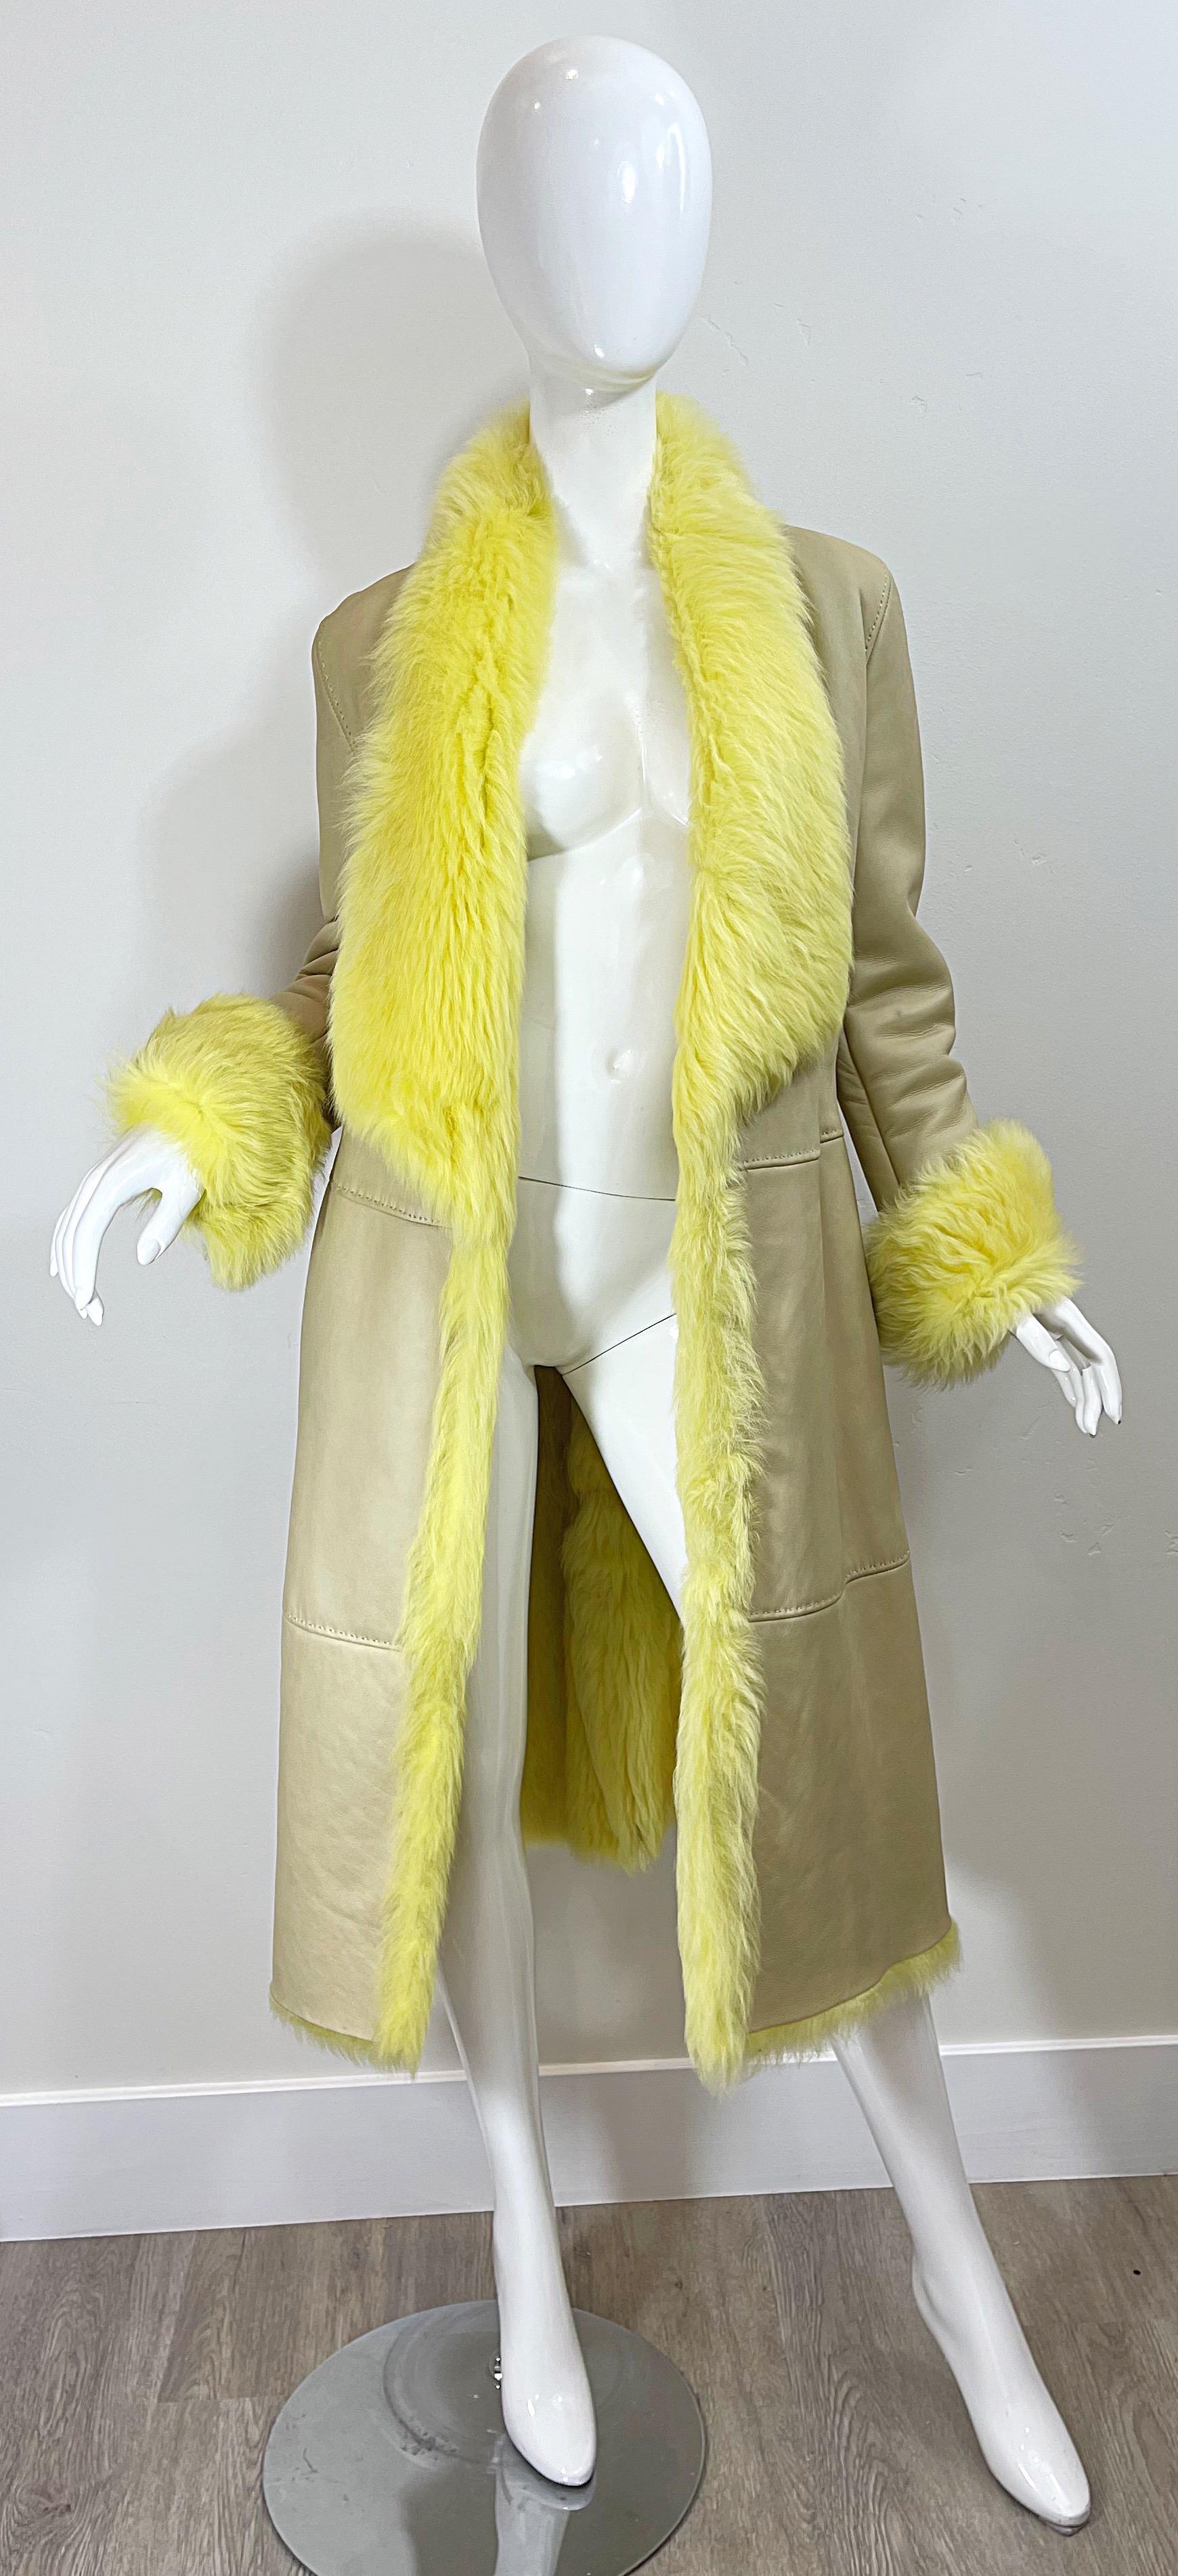 1990s Gianni Versace Tan Leather Yellow Shearling Fur Vintage Trench Coat Jacket For Sale 6